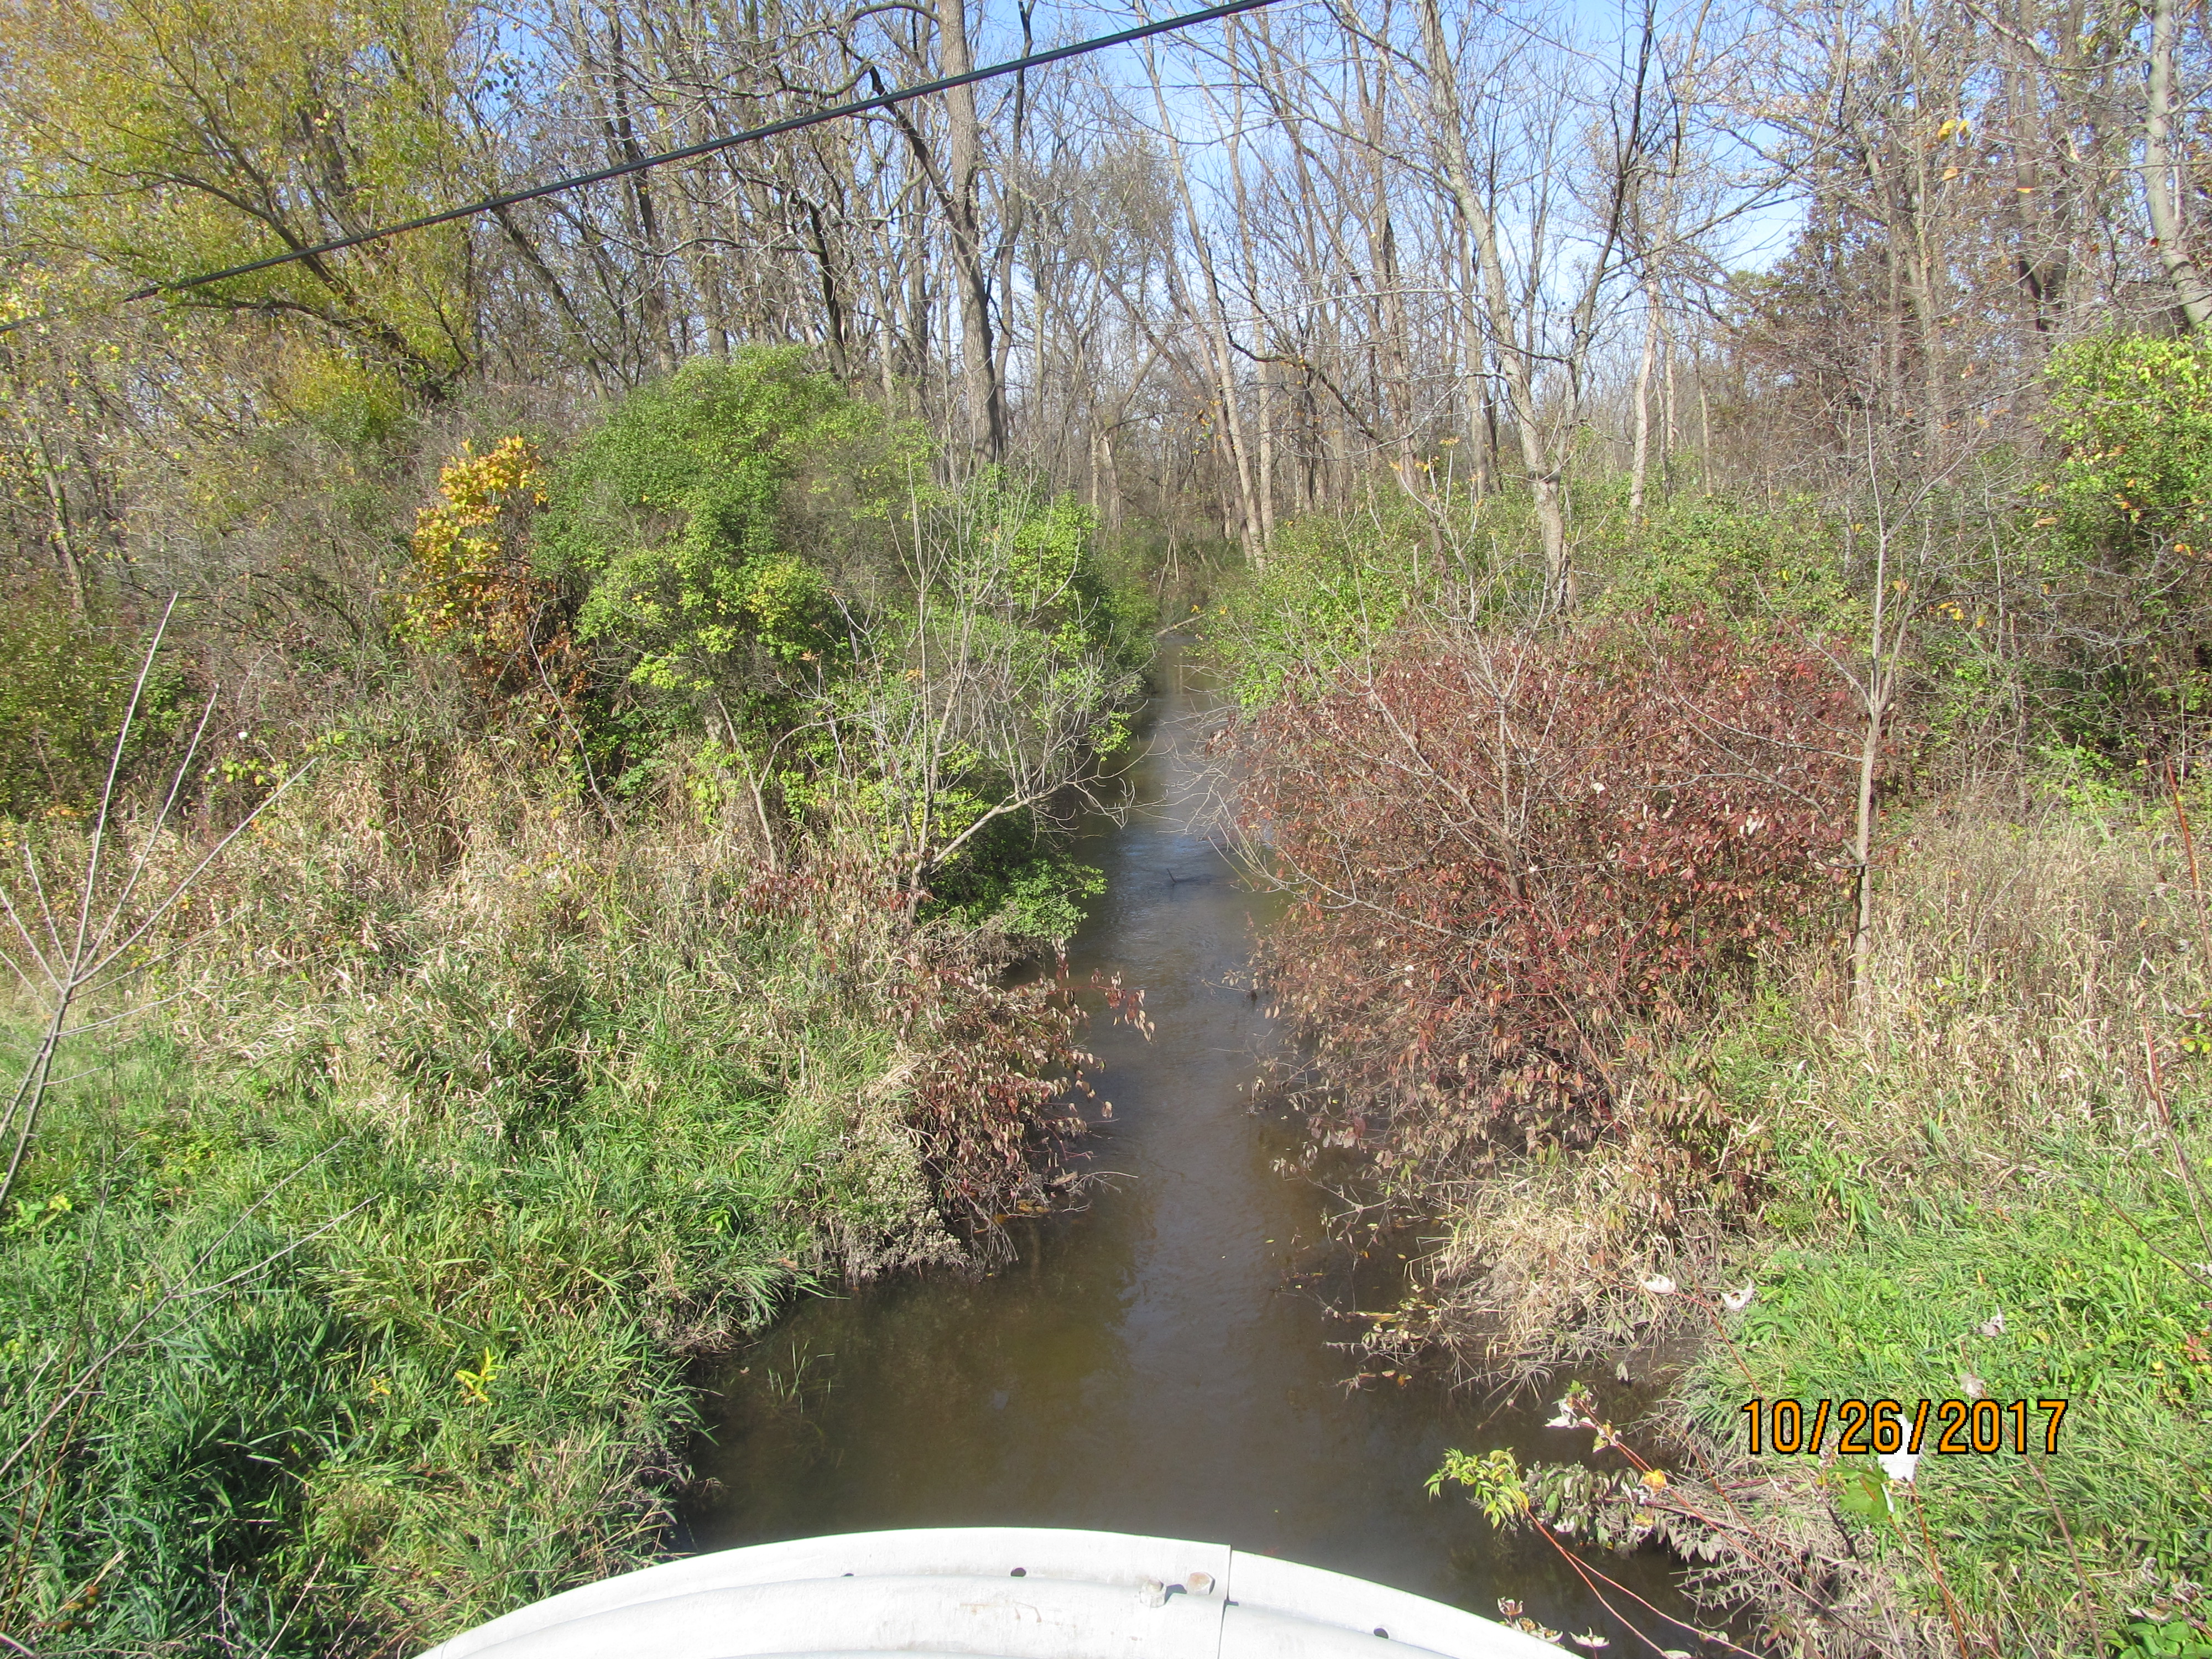 Local Water, Bass Creek Watershed (LR03)